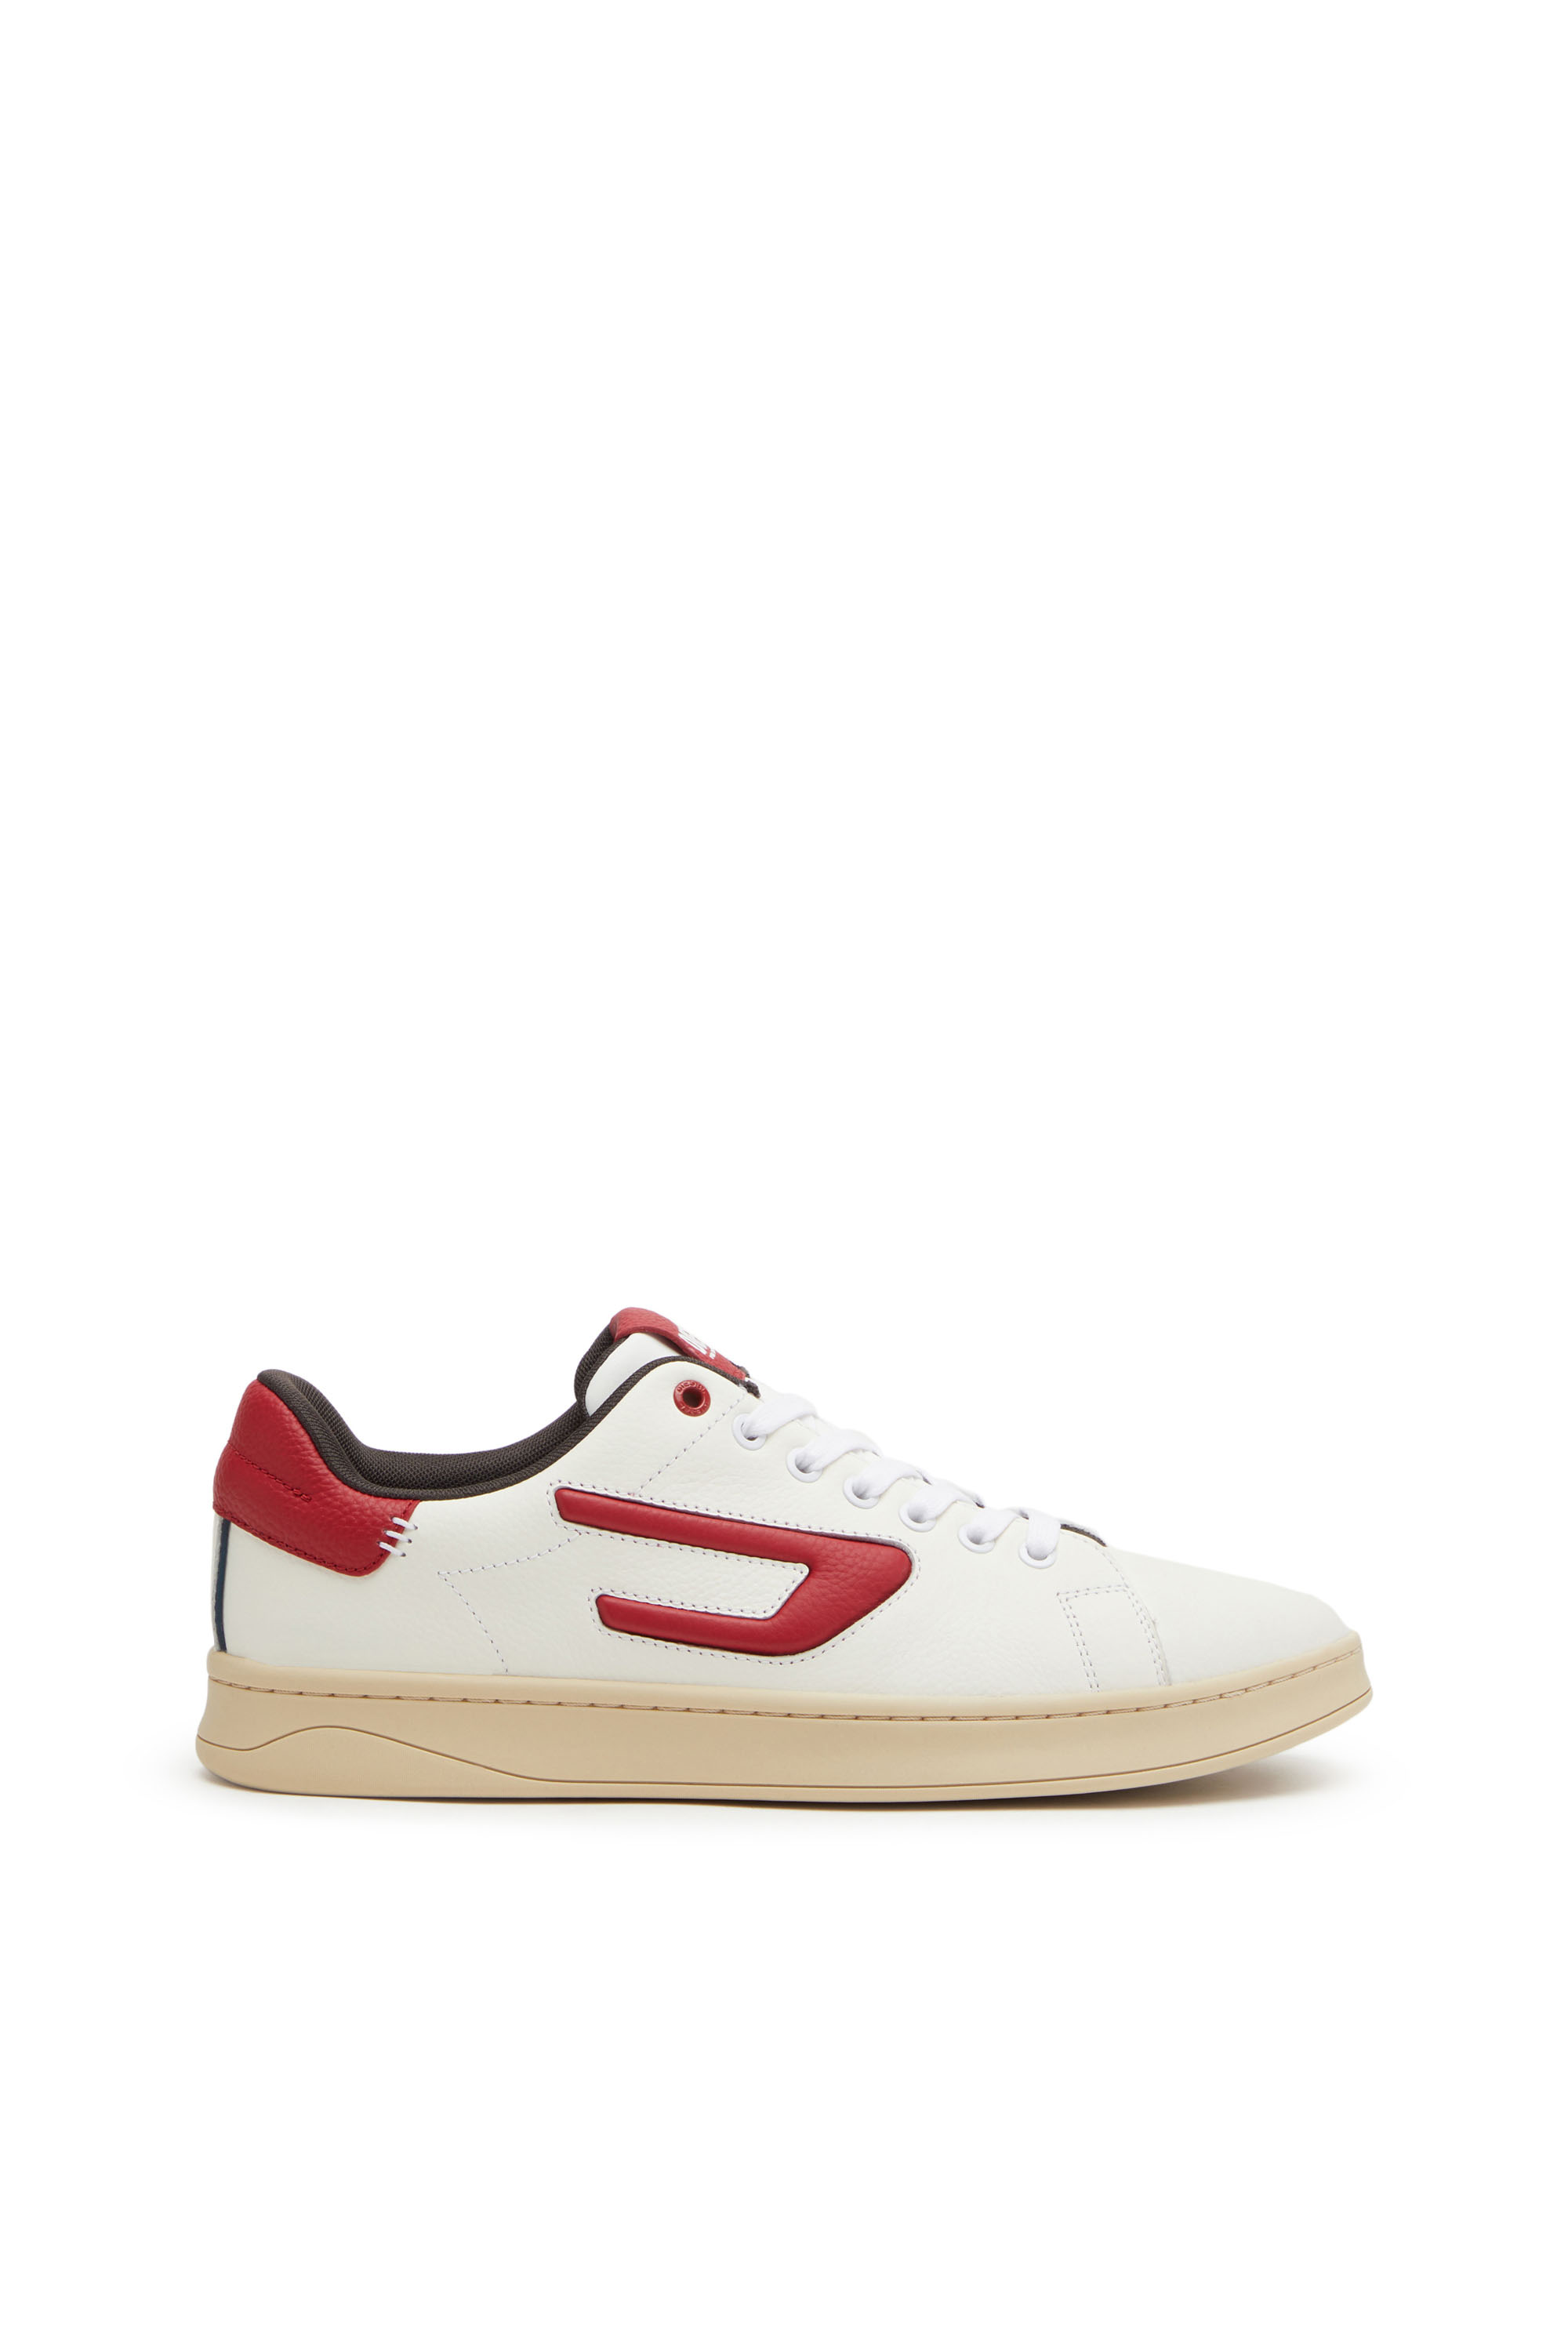 Diesel Sneakers - ATHENE S-ATHENE LOW SNEAKERS red